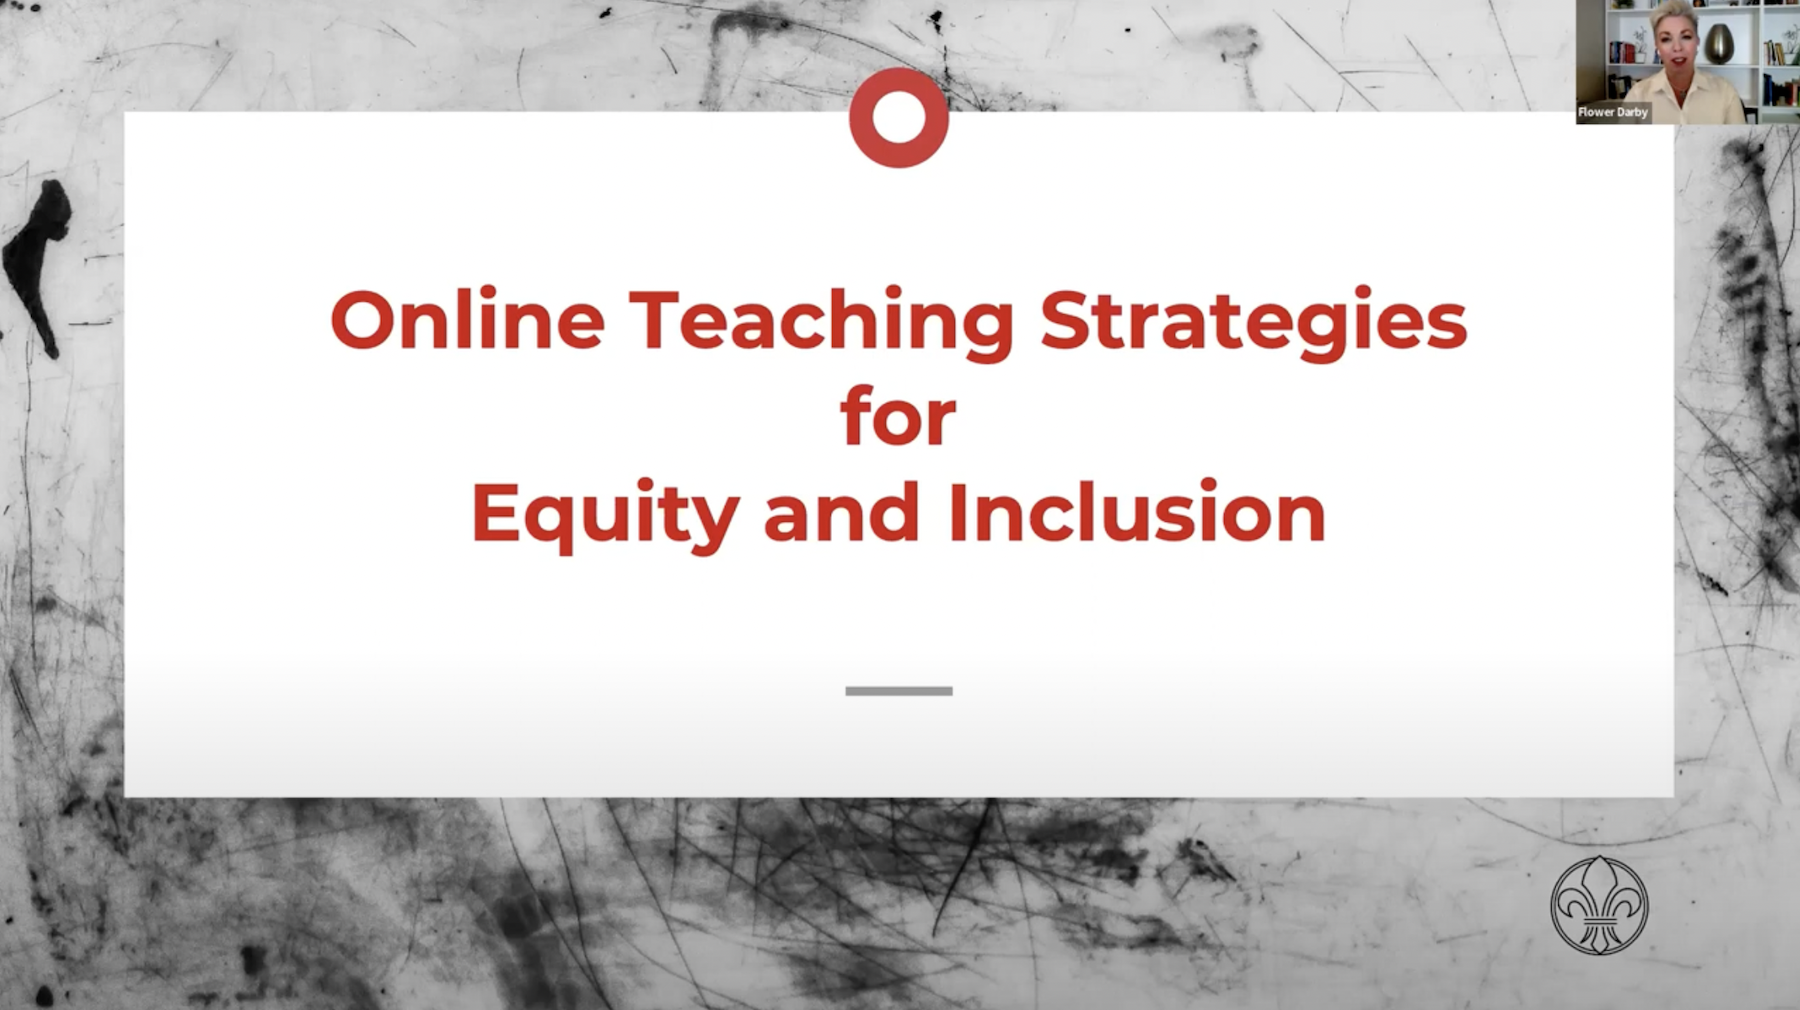 Online Teaching Strategies to Promote Equity and Inclusion thumbnail